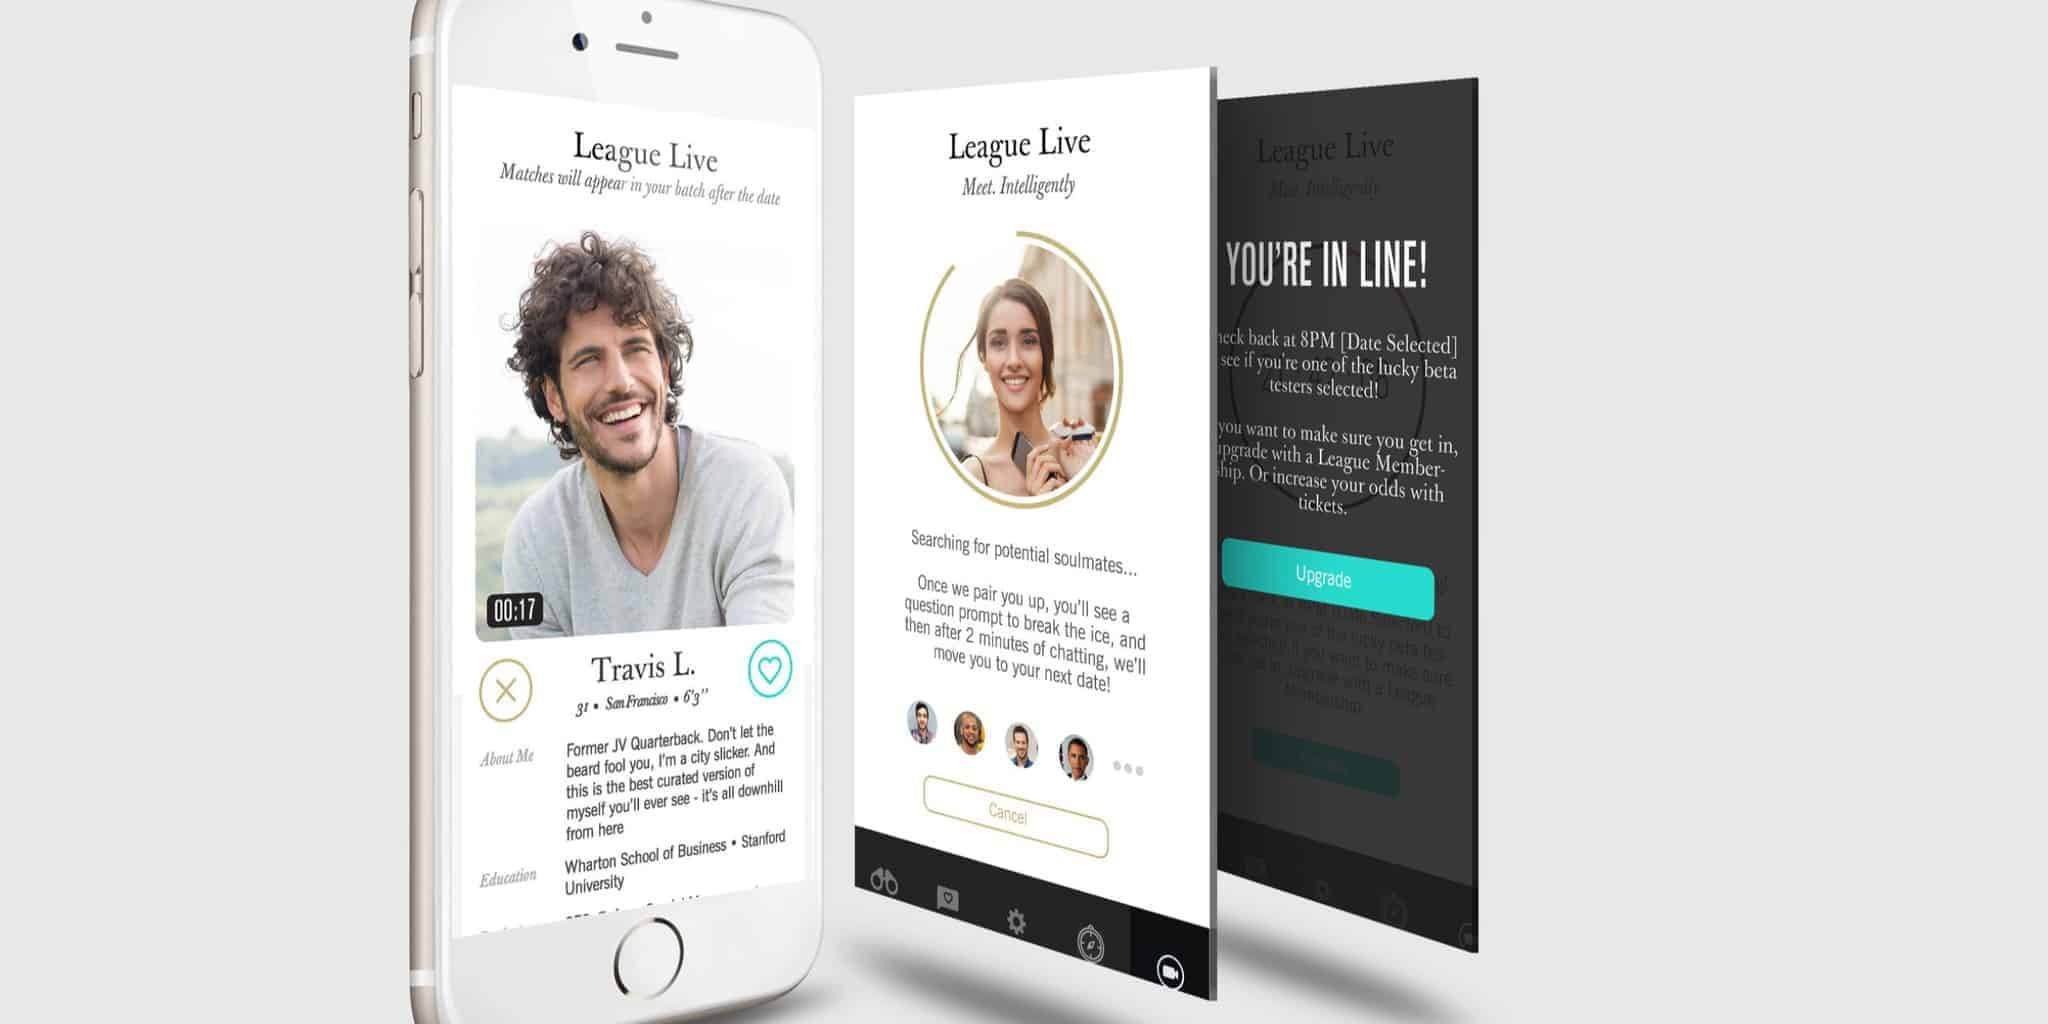 A video dating app, featuring The League's interface and users shown as a woman and a man.